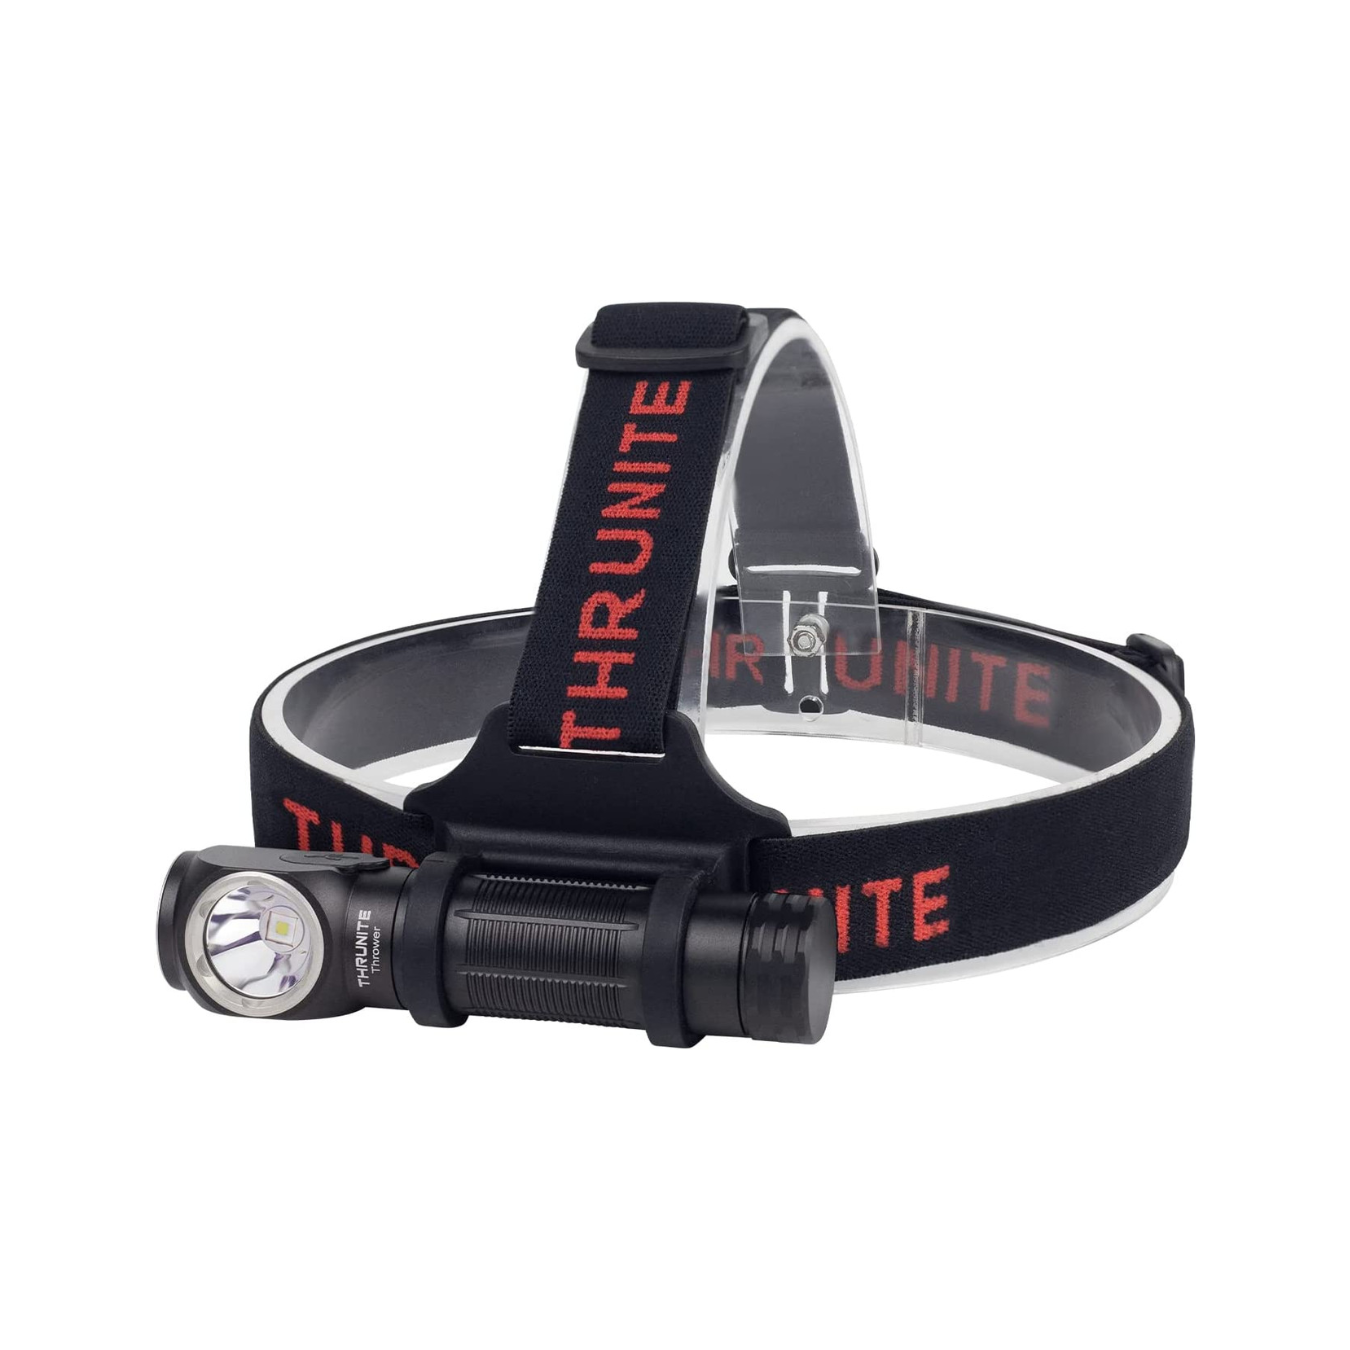 ThruNite Thrower LUMINUS SFT40 CW LED 1755L Rechargeable Headlamp